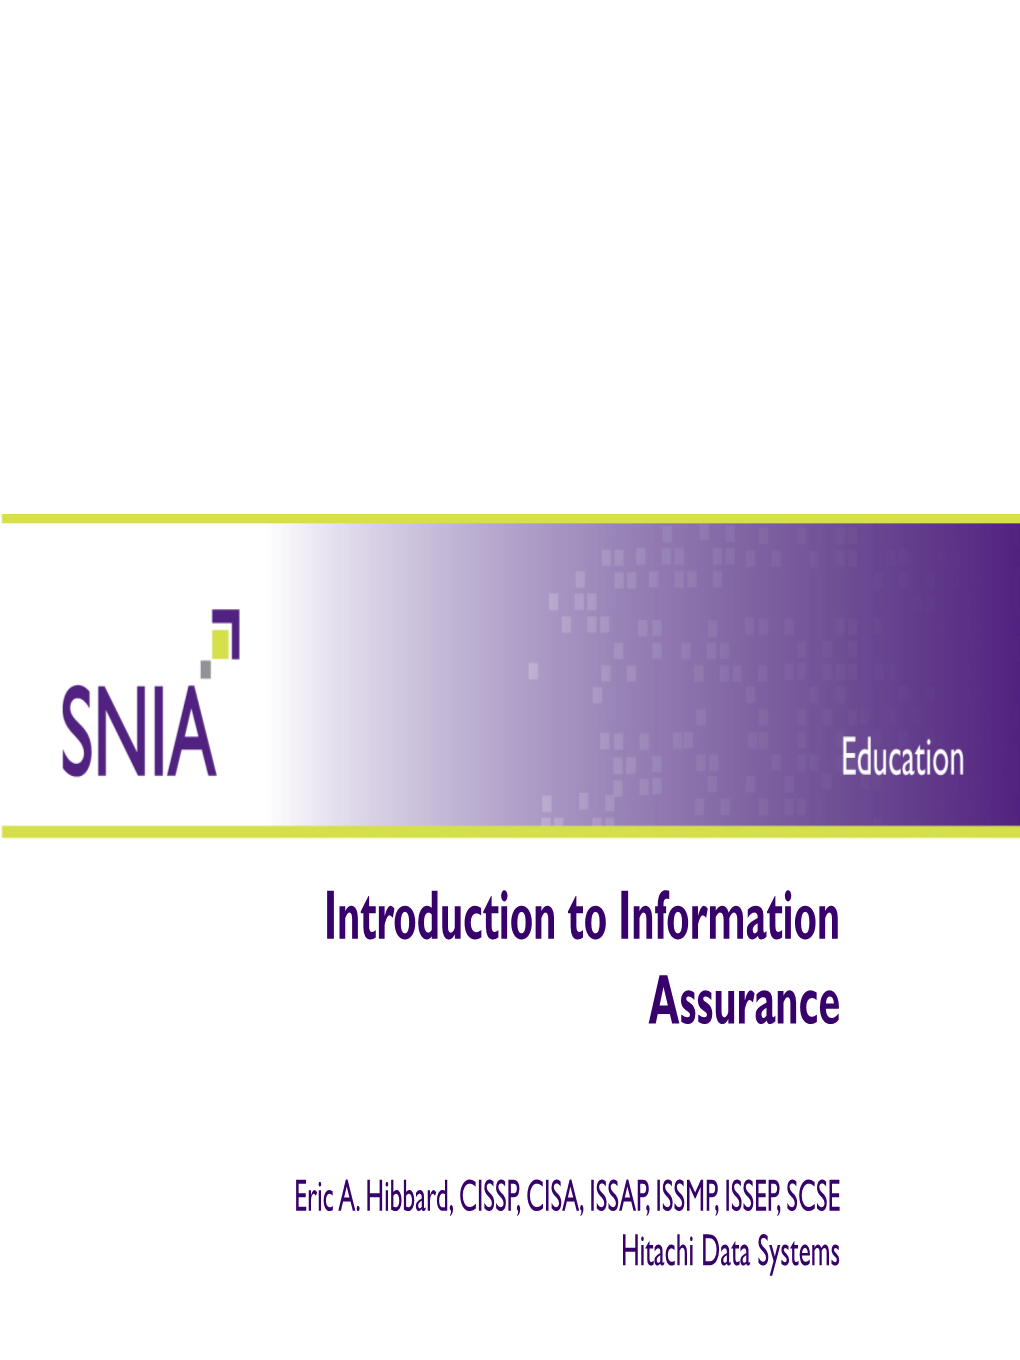 Introduction to Information Assurance